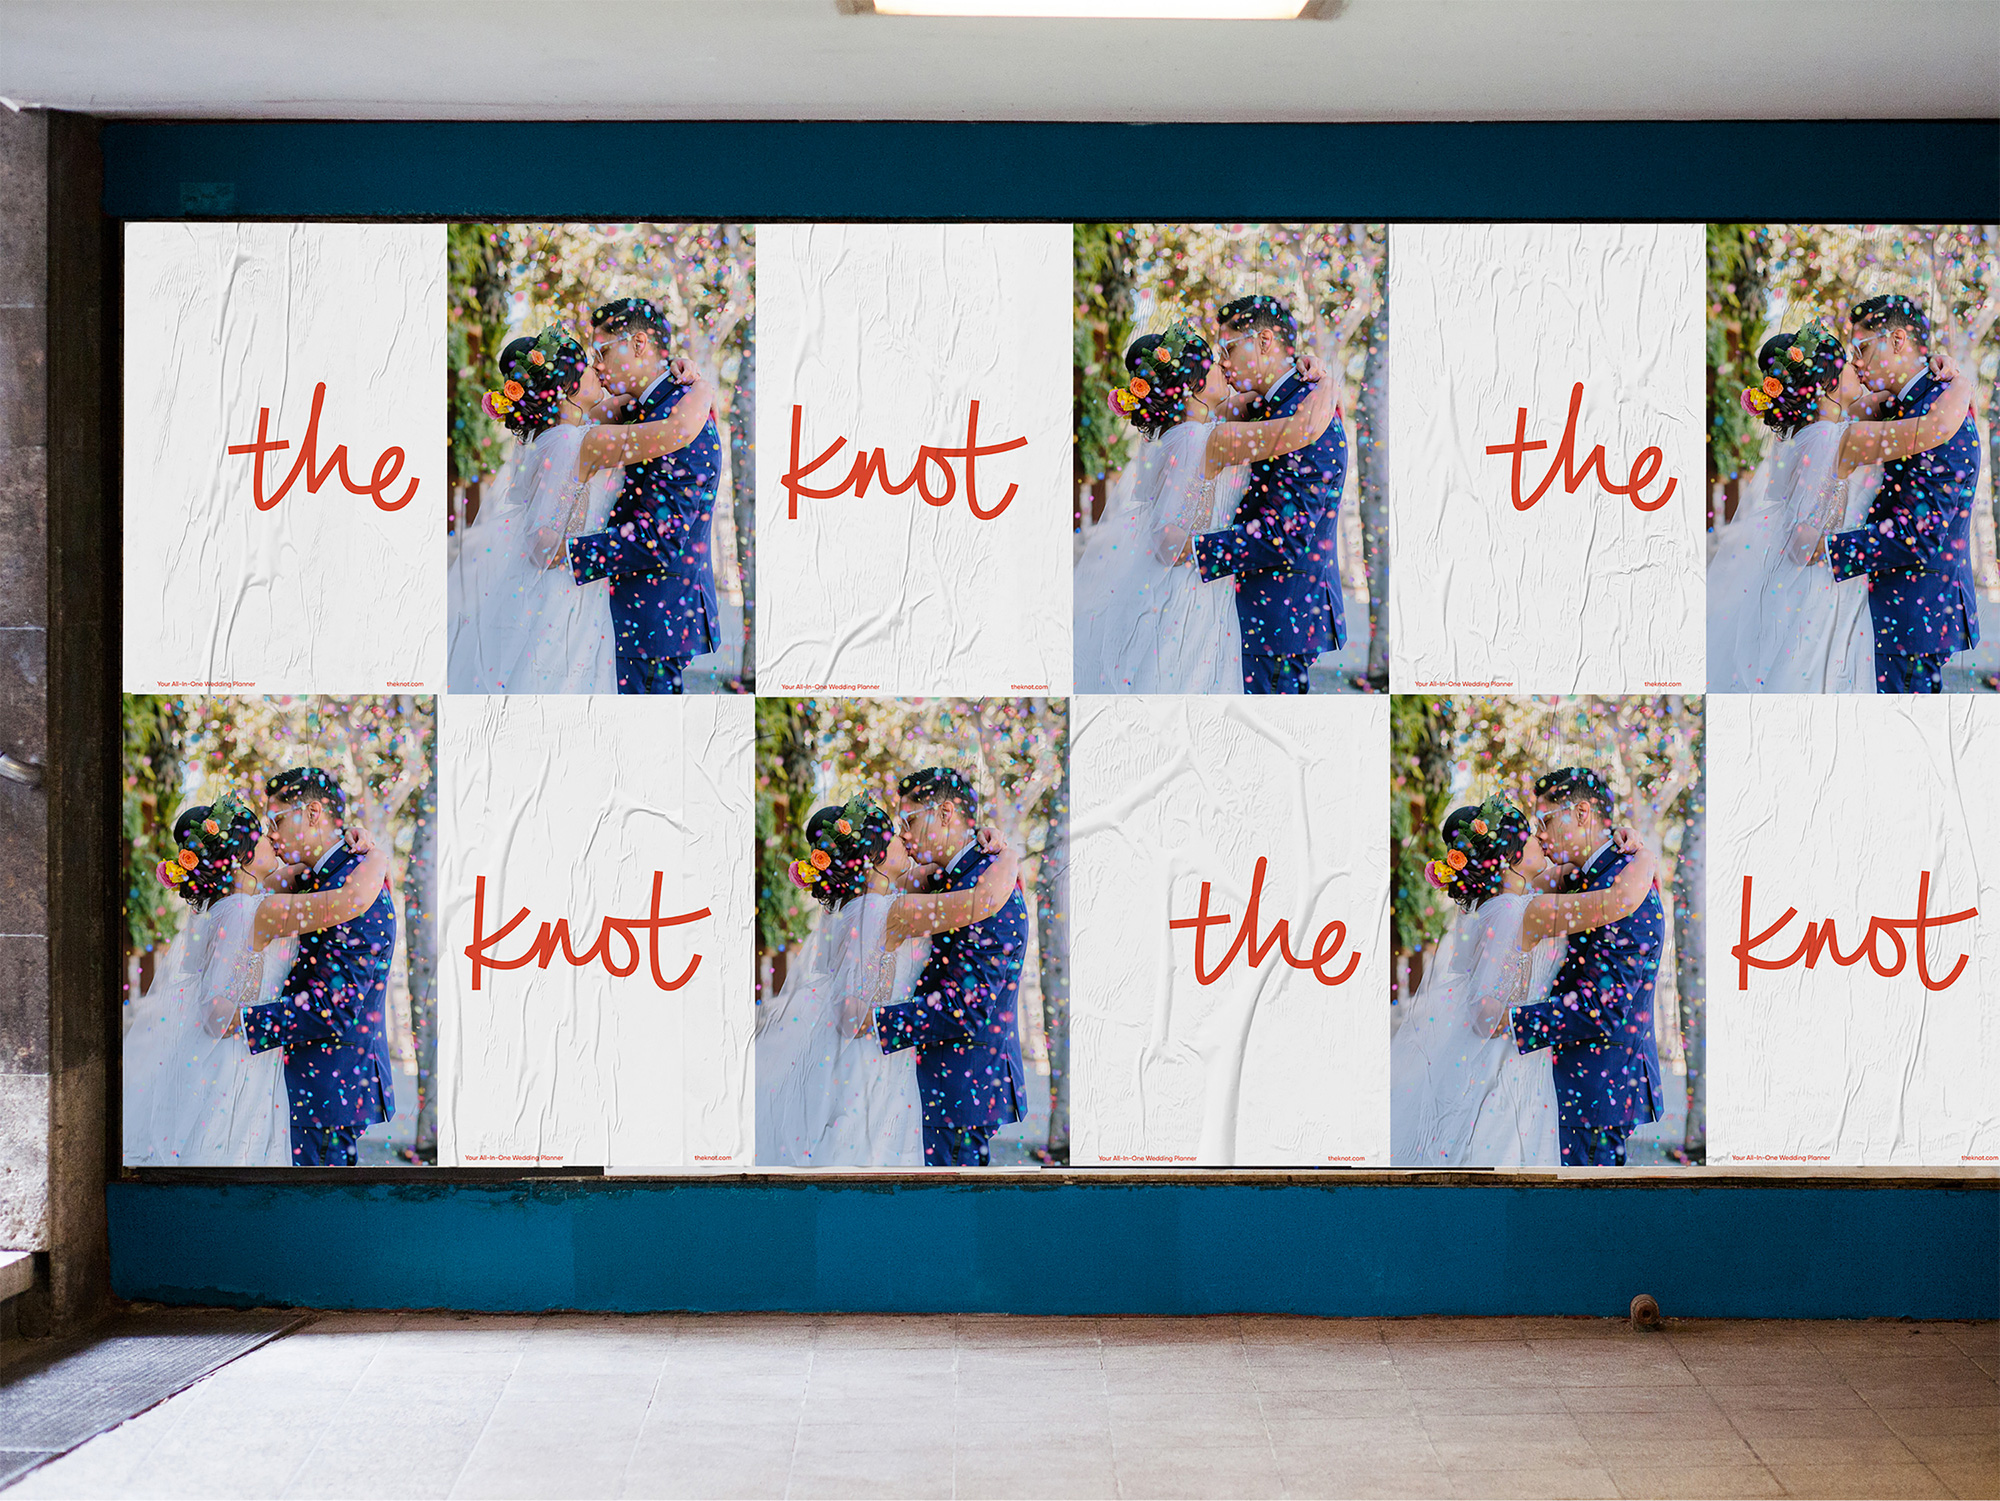 New Logo and Identity for The Knot by Pentagram